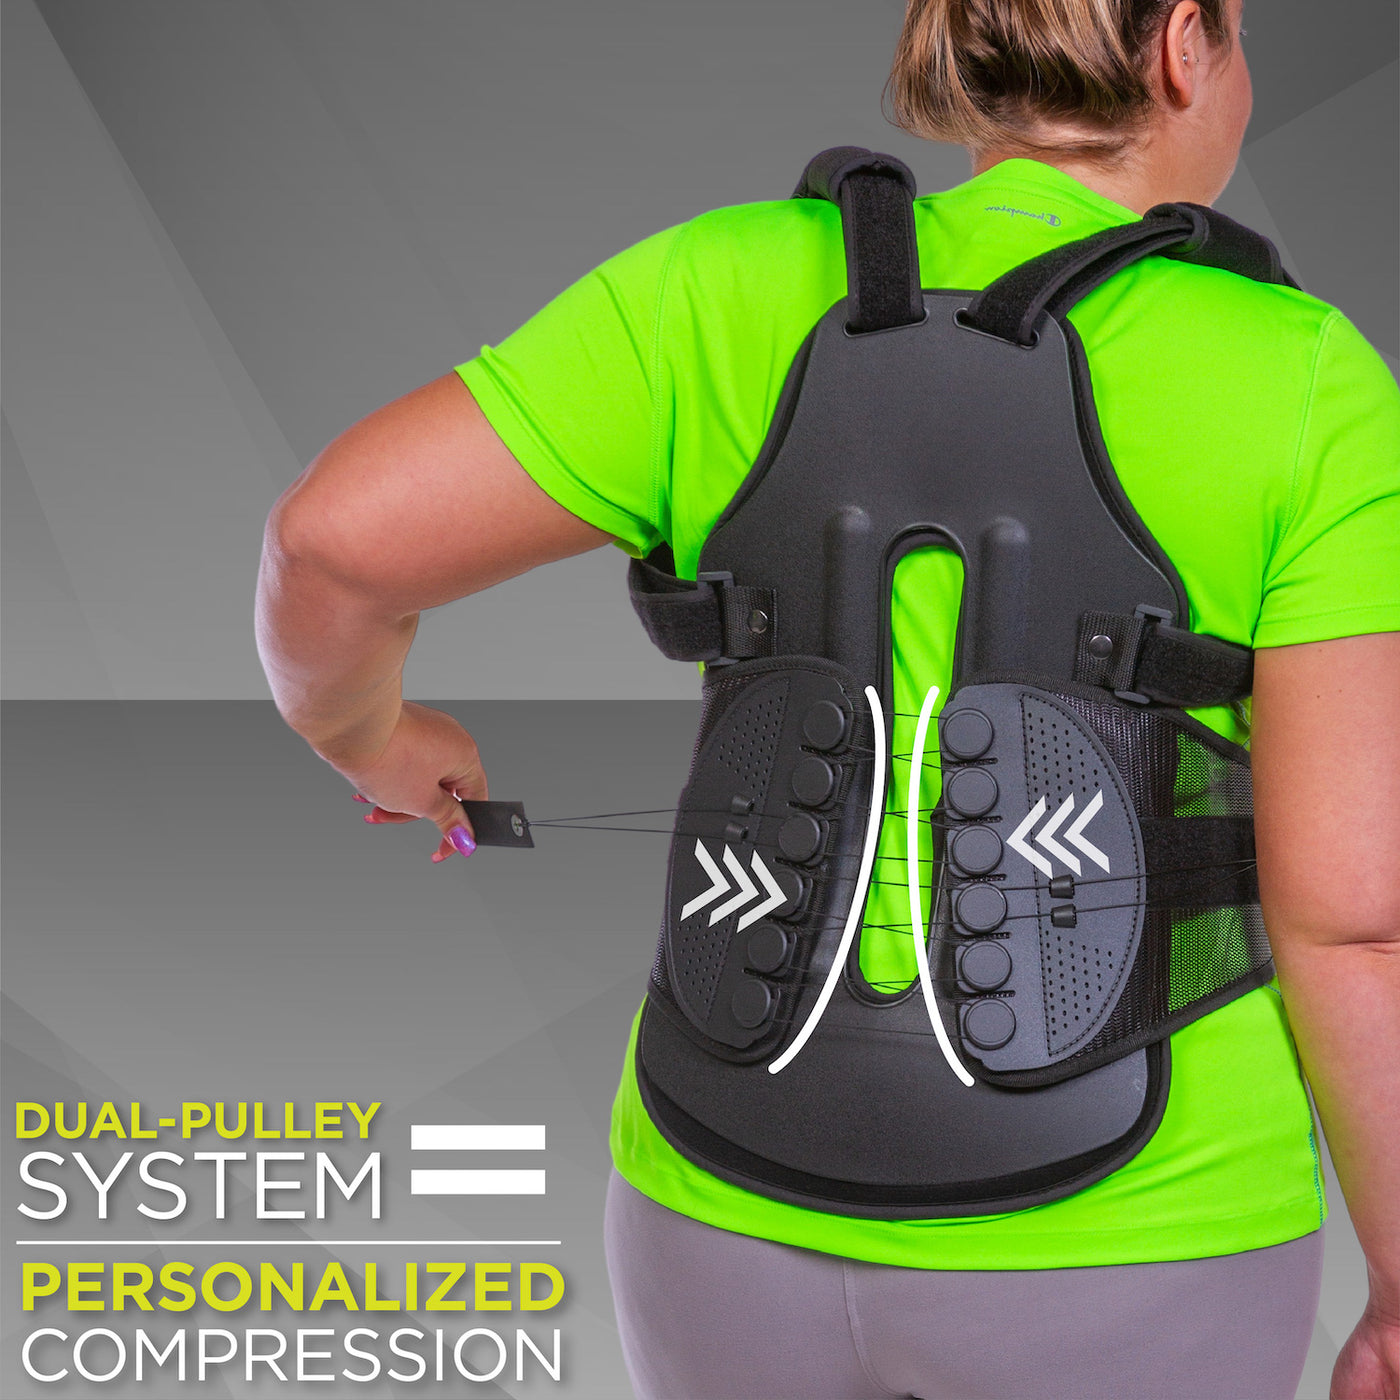 back straightener posture corrector has a mechanical advantage pulley system that compresses the spine